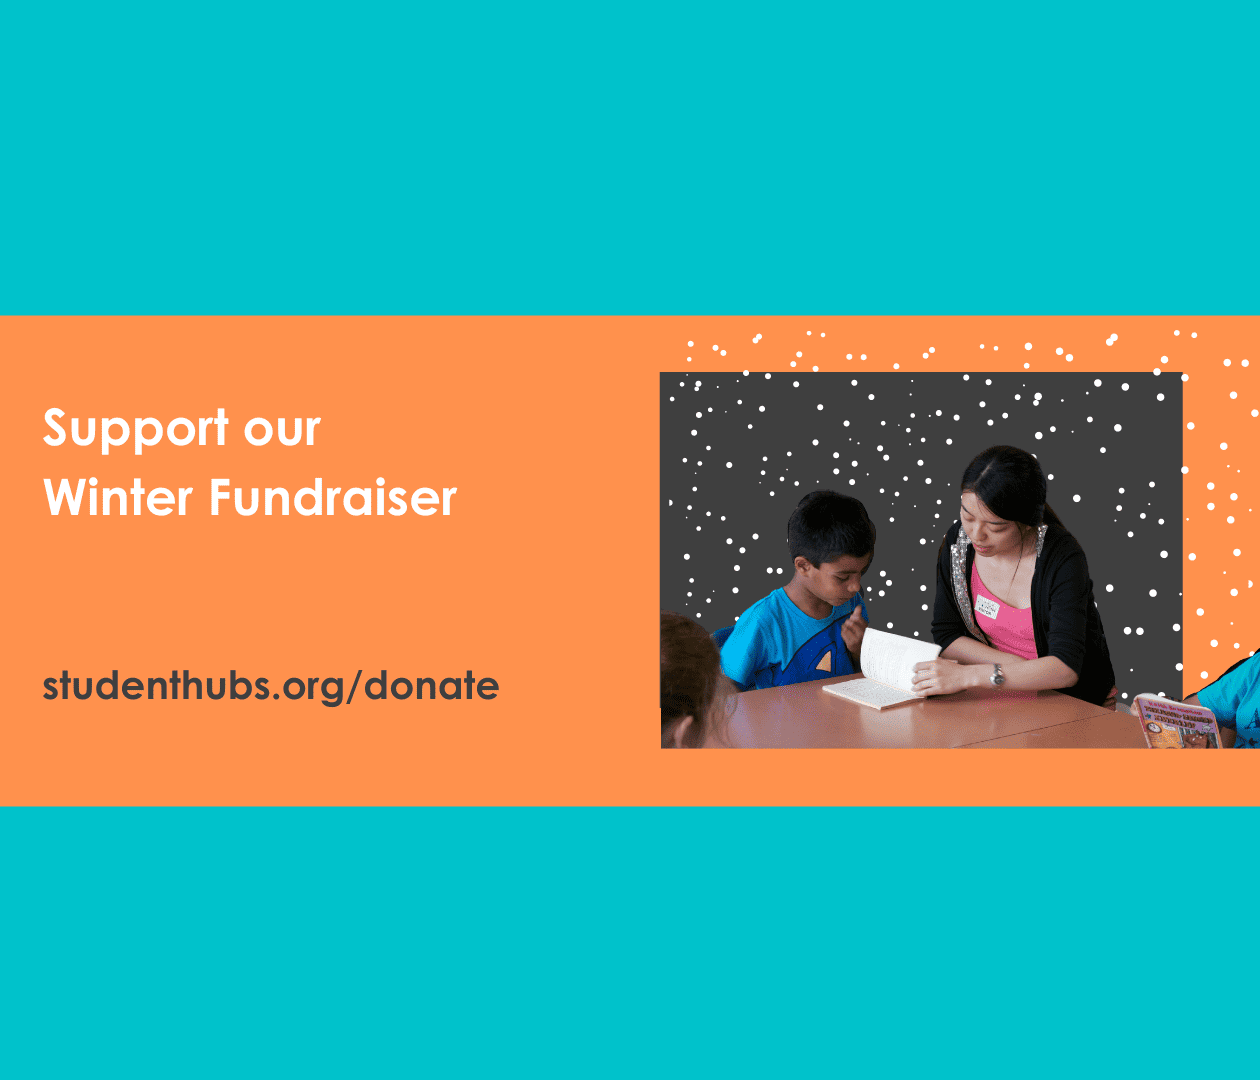 On a turquoise background and orange rectangle. White text on the left of the rectangle reads "Support our Winter Fundraiser", below that in grey "studenthubs.org/donate". To the right a photo of a student reading a book with a young person is on a grey background covered in snow.